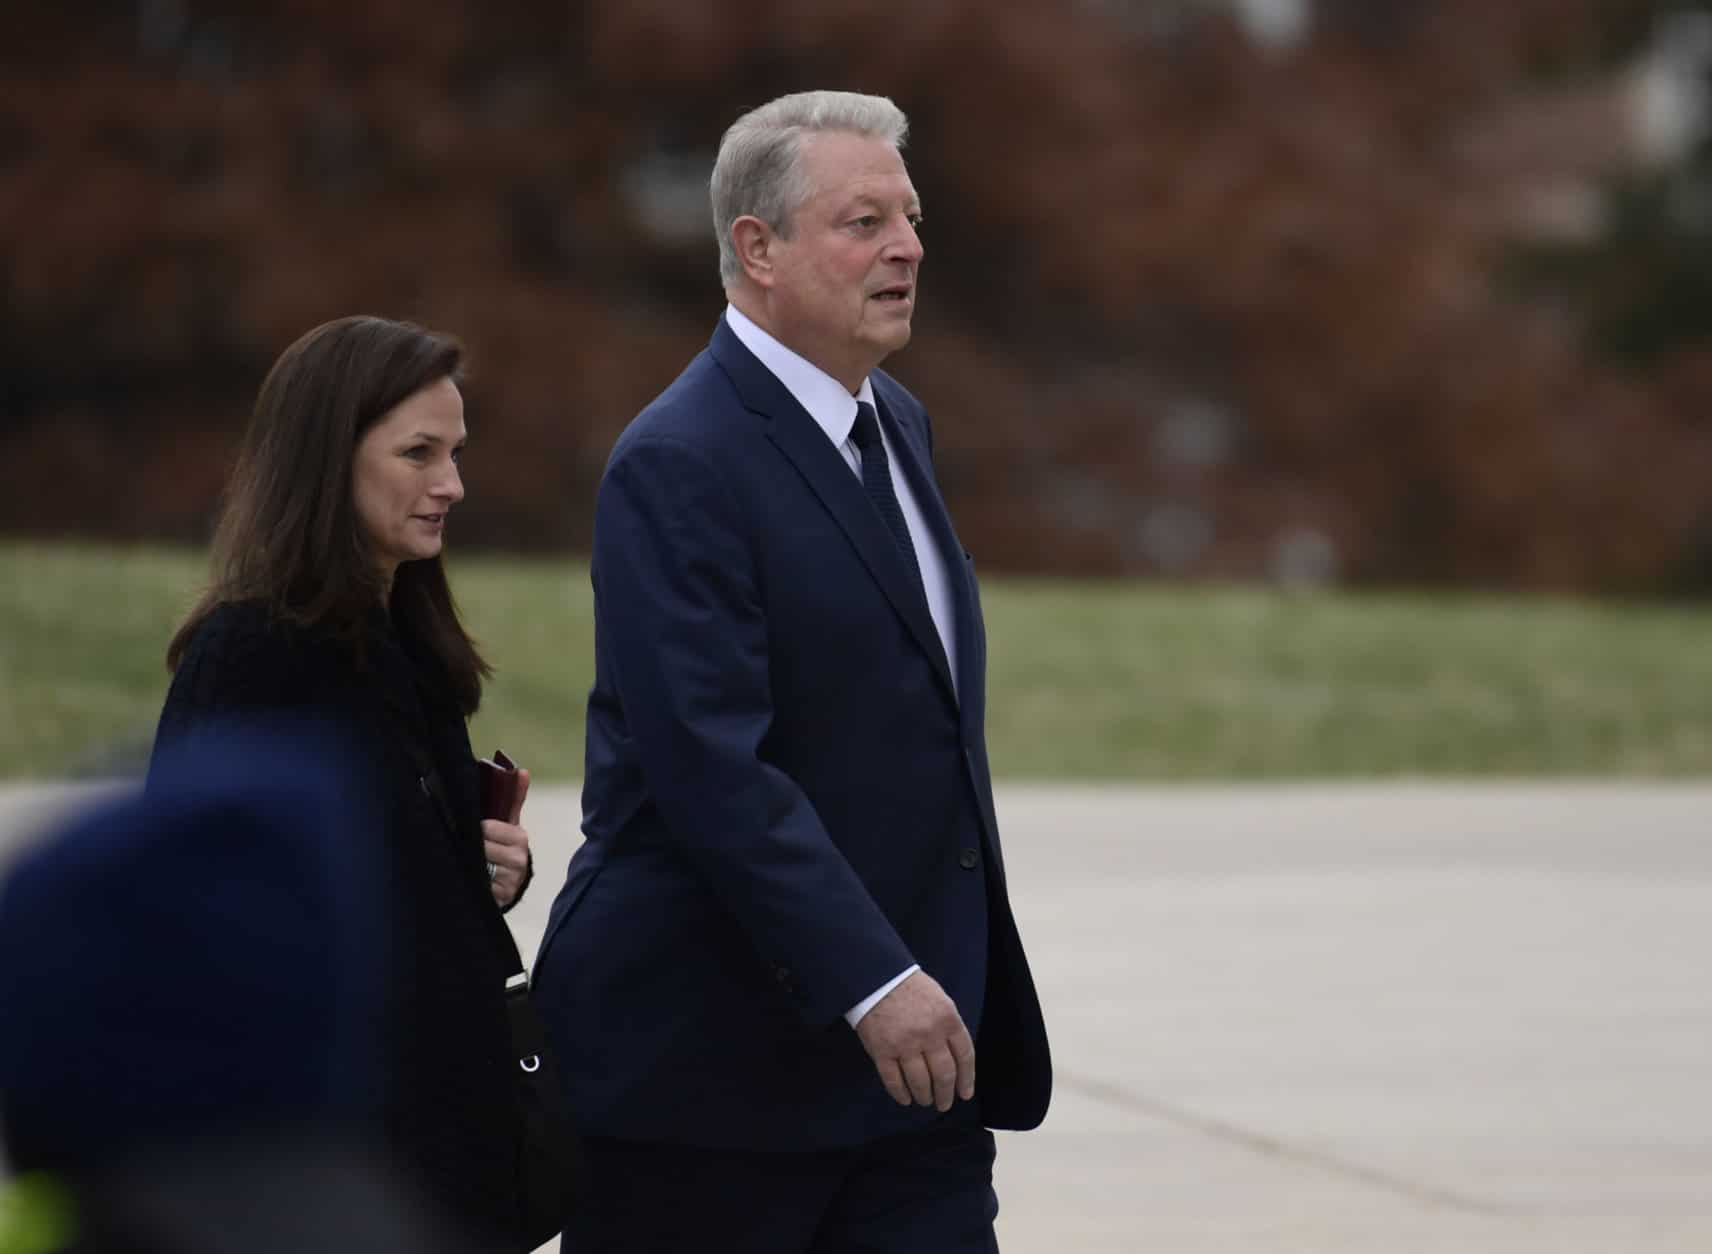 Former Vice President Al Gore arrives for the State Funeral of former President George H.W. Bush at the National Cathedral in Washington, Wednesday, Dec. 5, 2018. (AP Photo/Susan Walsh)